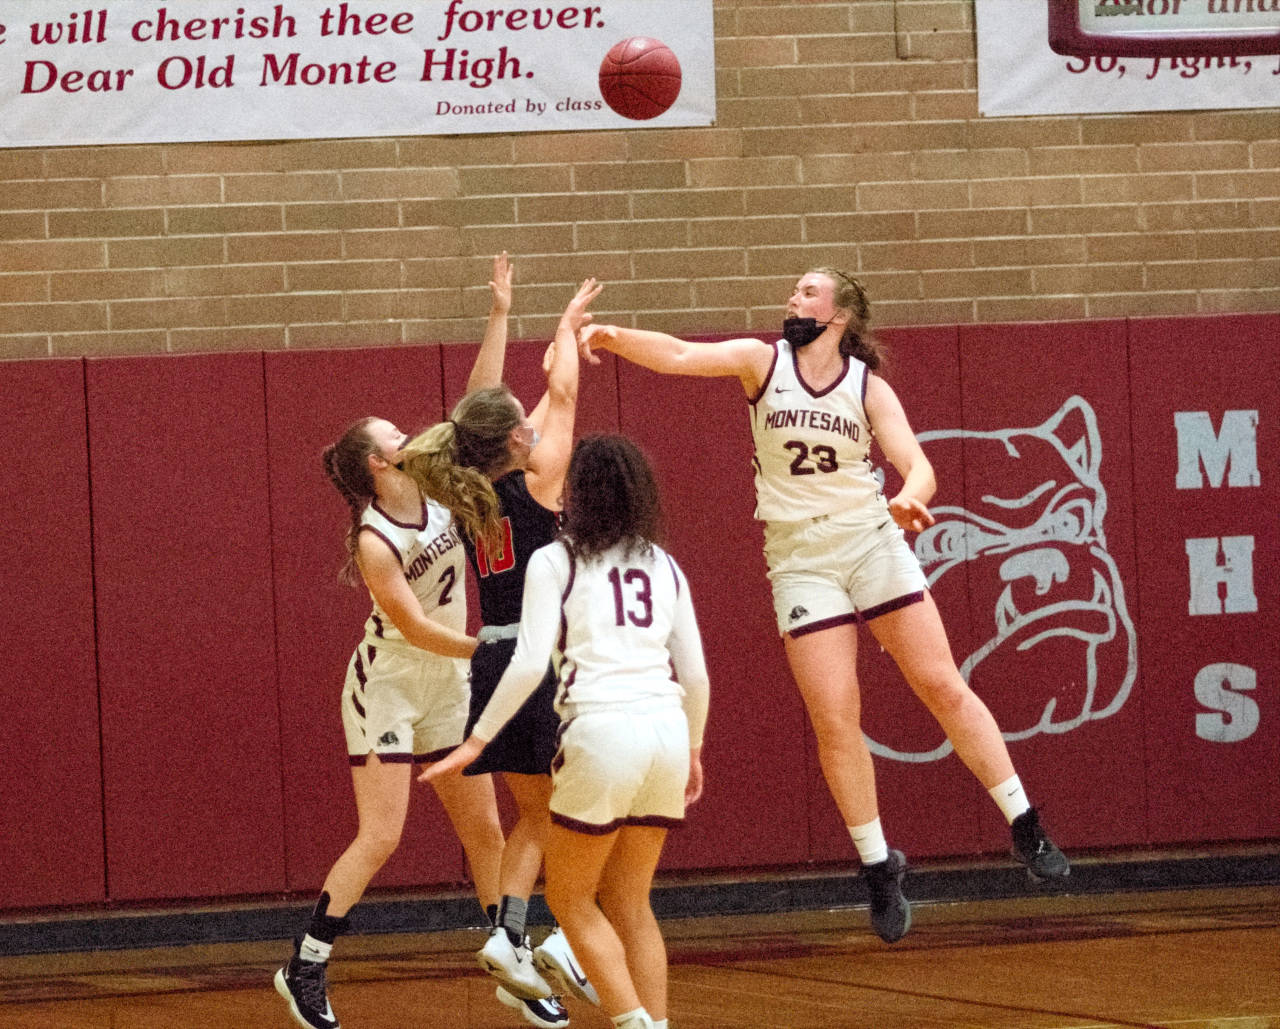 RYAN SPARKS | THE DAILY WORLD
Montesano’s Paige Lisherness (23) and Cassadie Golding (2) challenge the shot of Tenino’s Grace Vestal during the Bulldogs’ 57-43 win on Tuesday at Montesano High School.